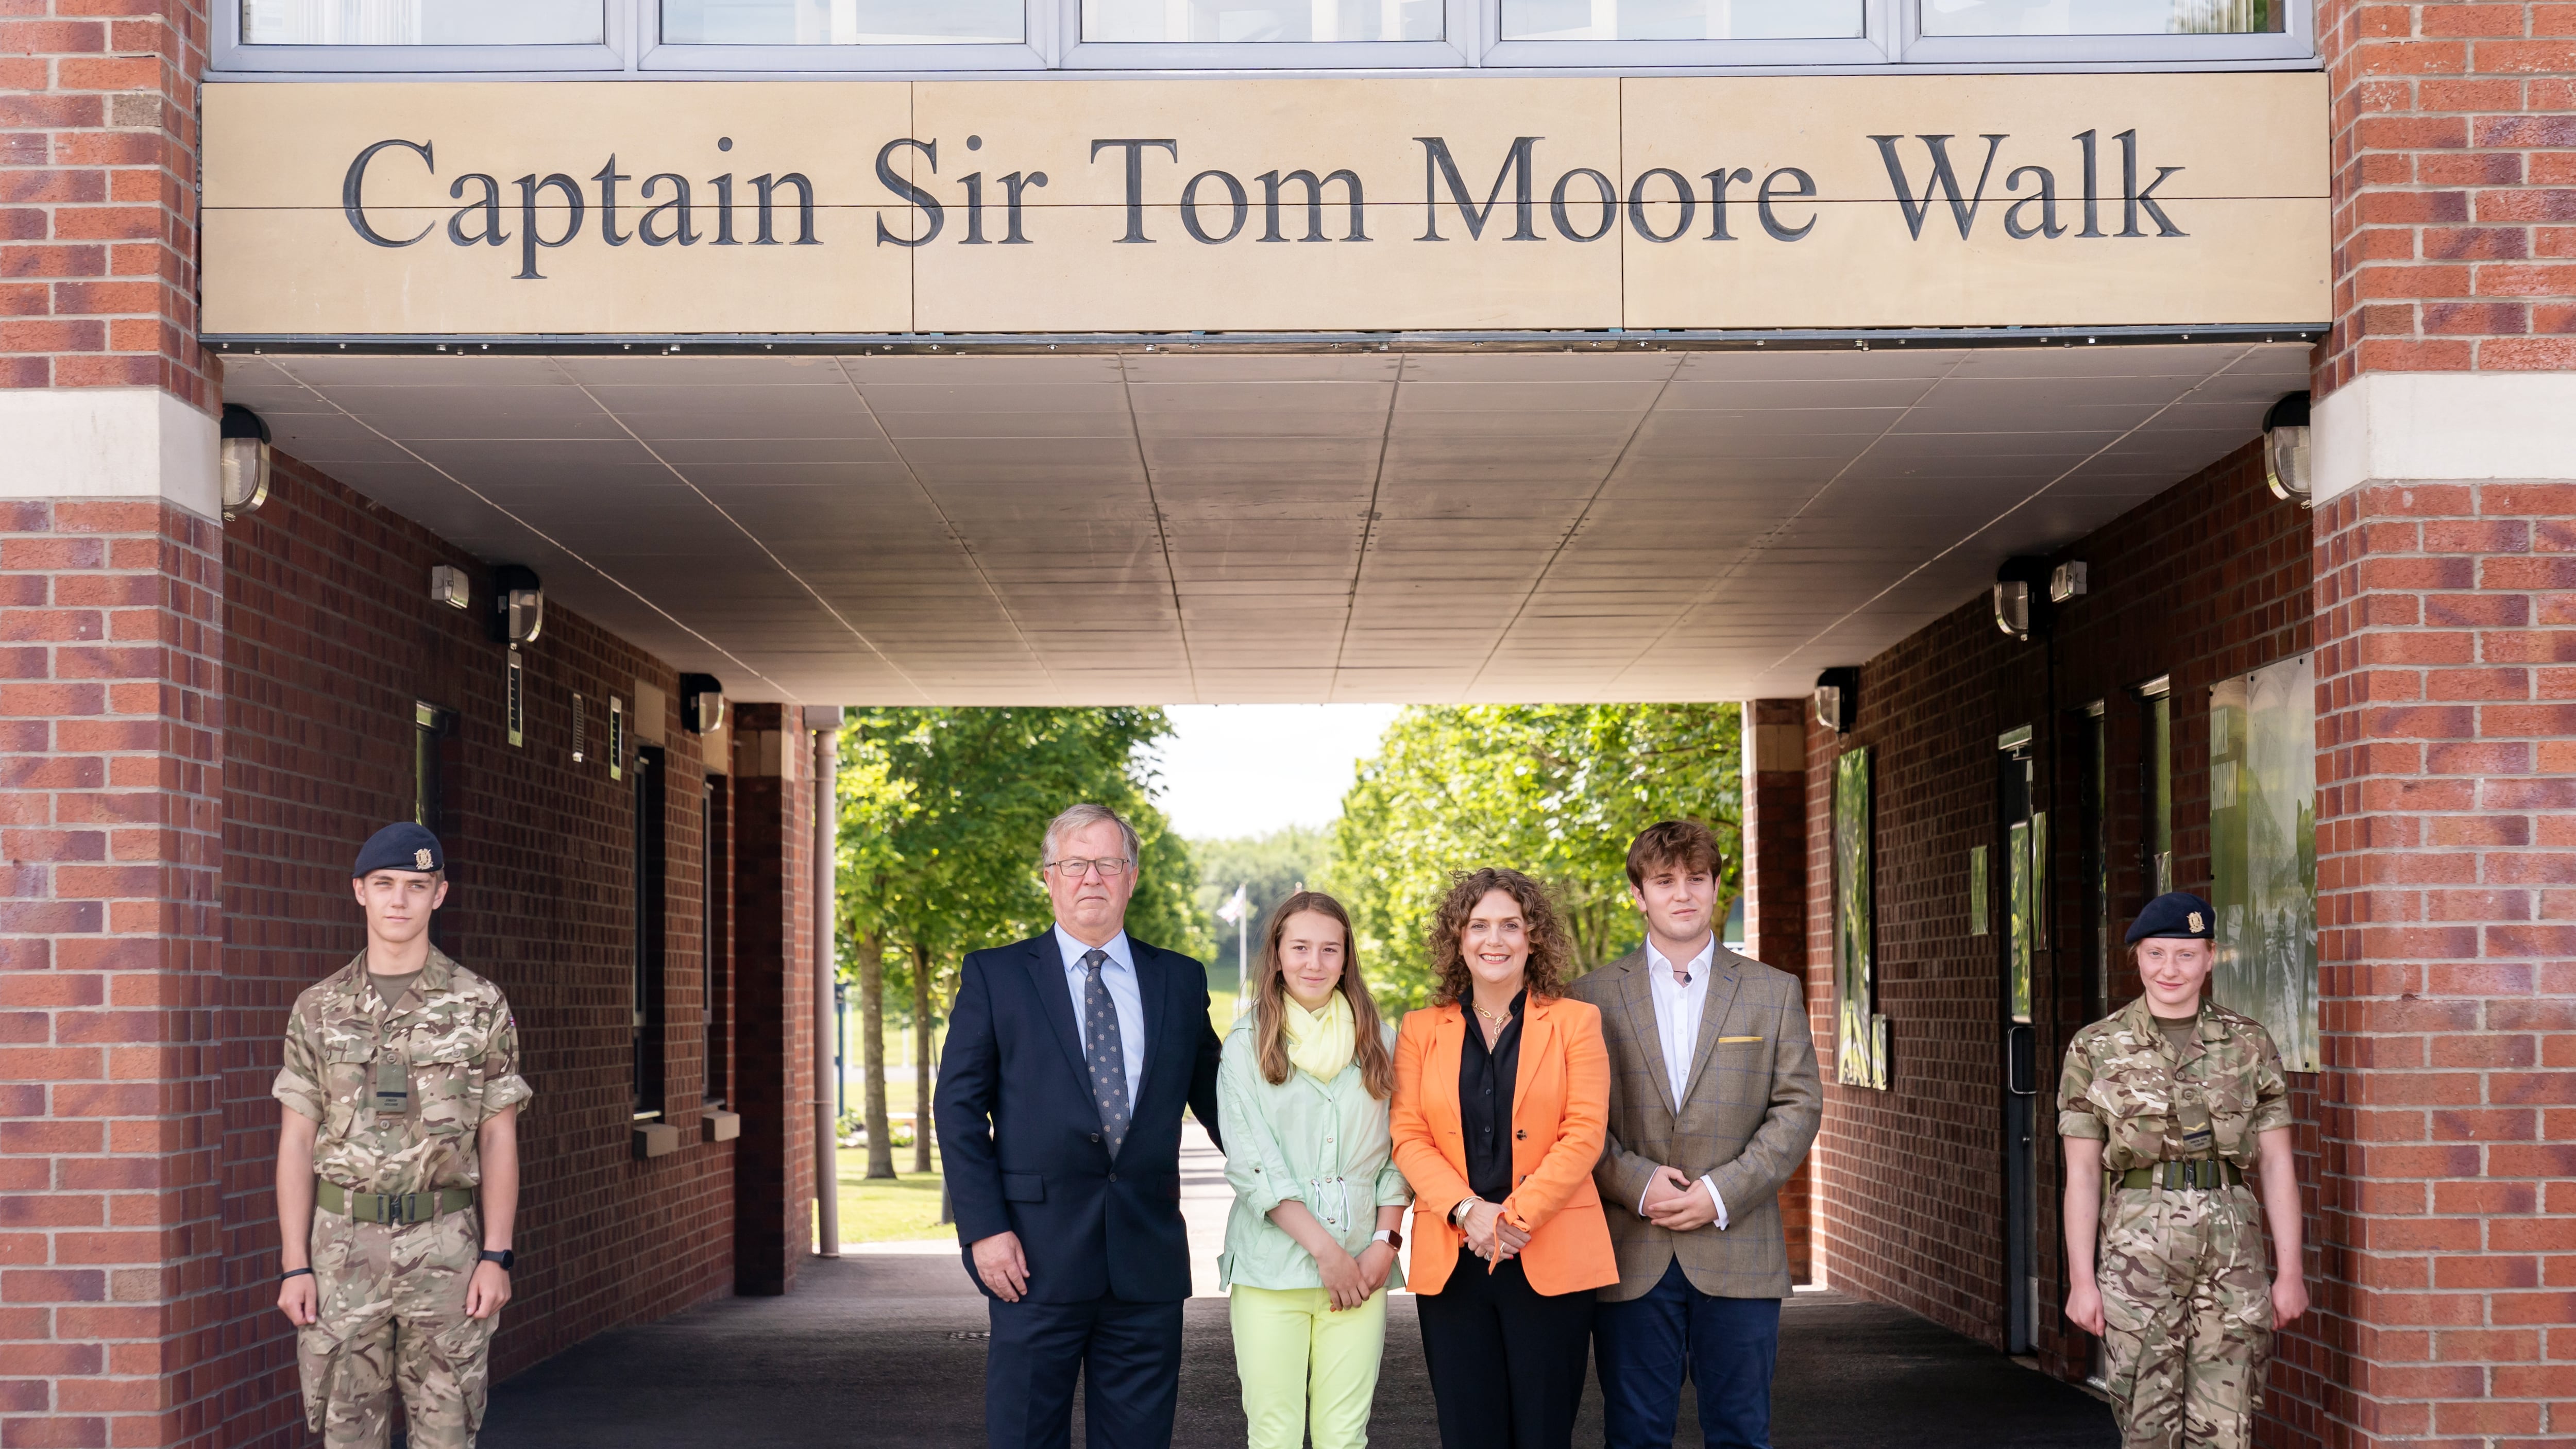 Colin Ingram-Moore (left) and Hannah Ingram-Moore (second from right) have been disqualified as charity trustees